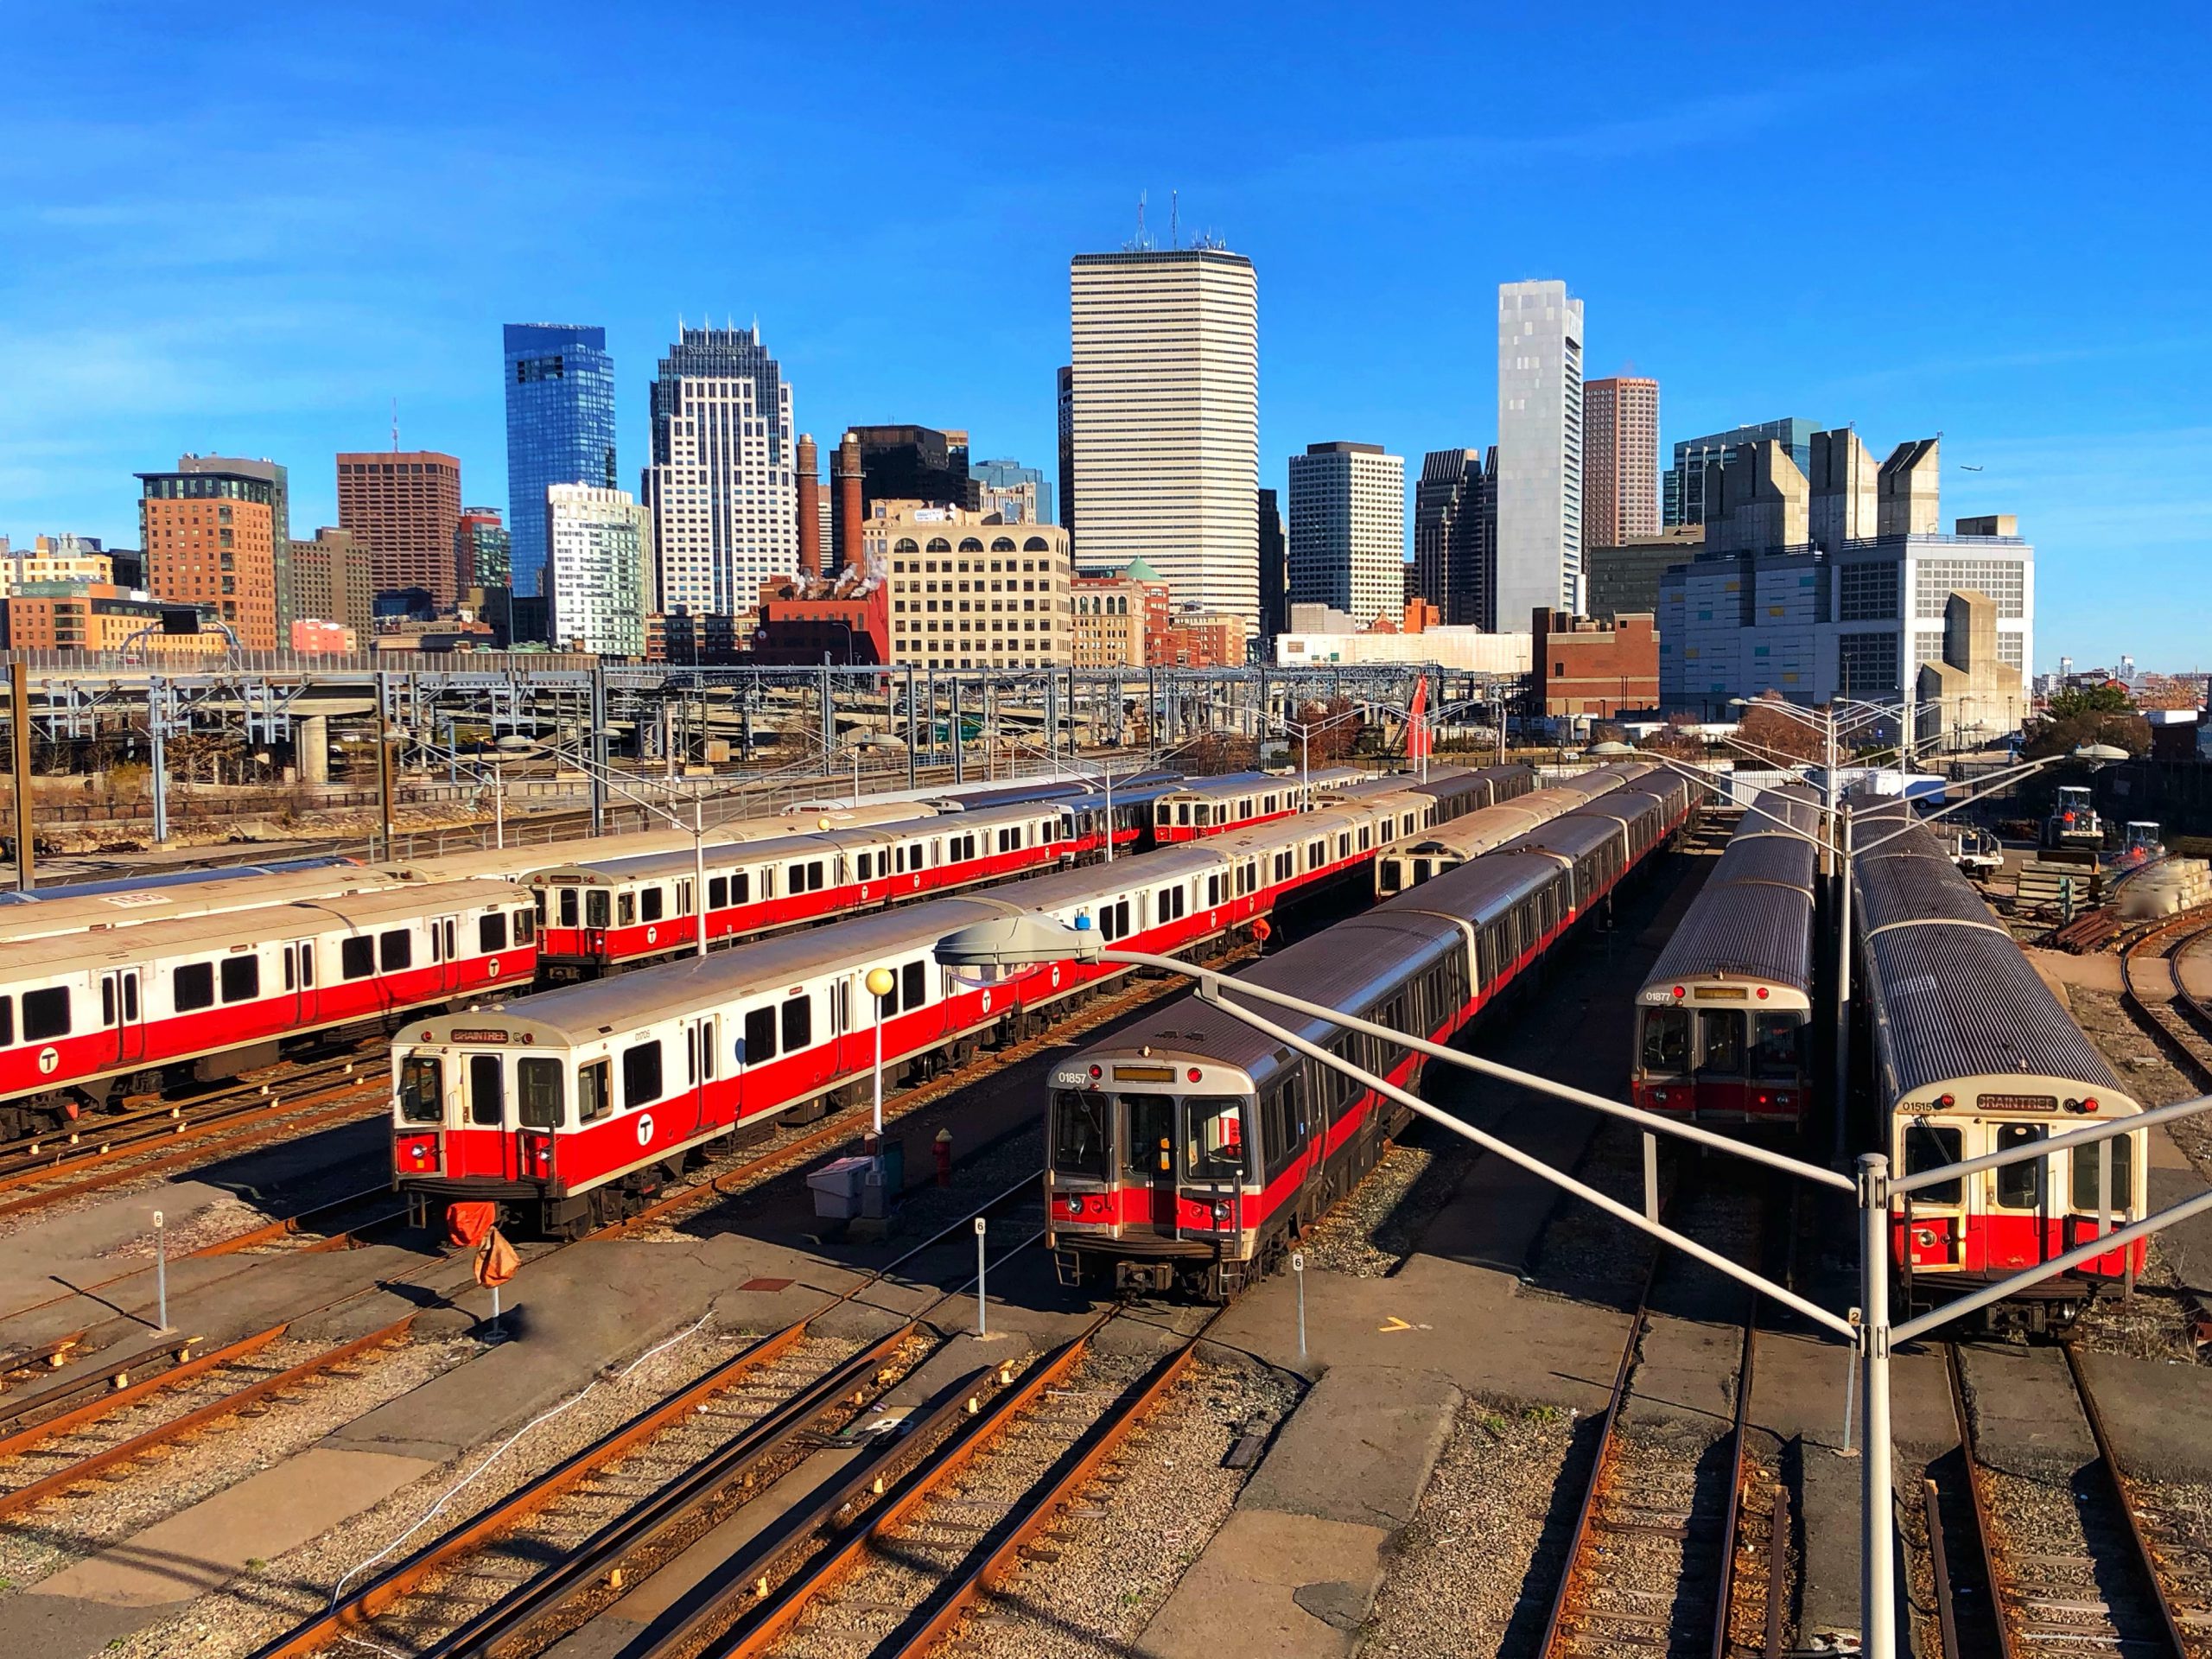 Several Red Line trains wait on the tracks with the Boston skyline in the background.